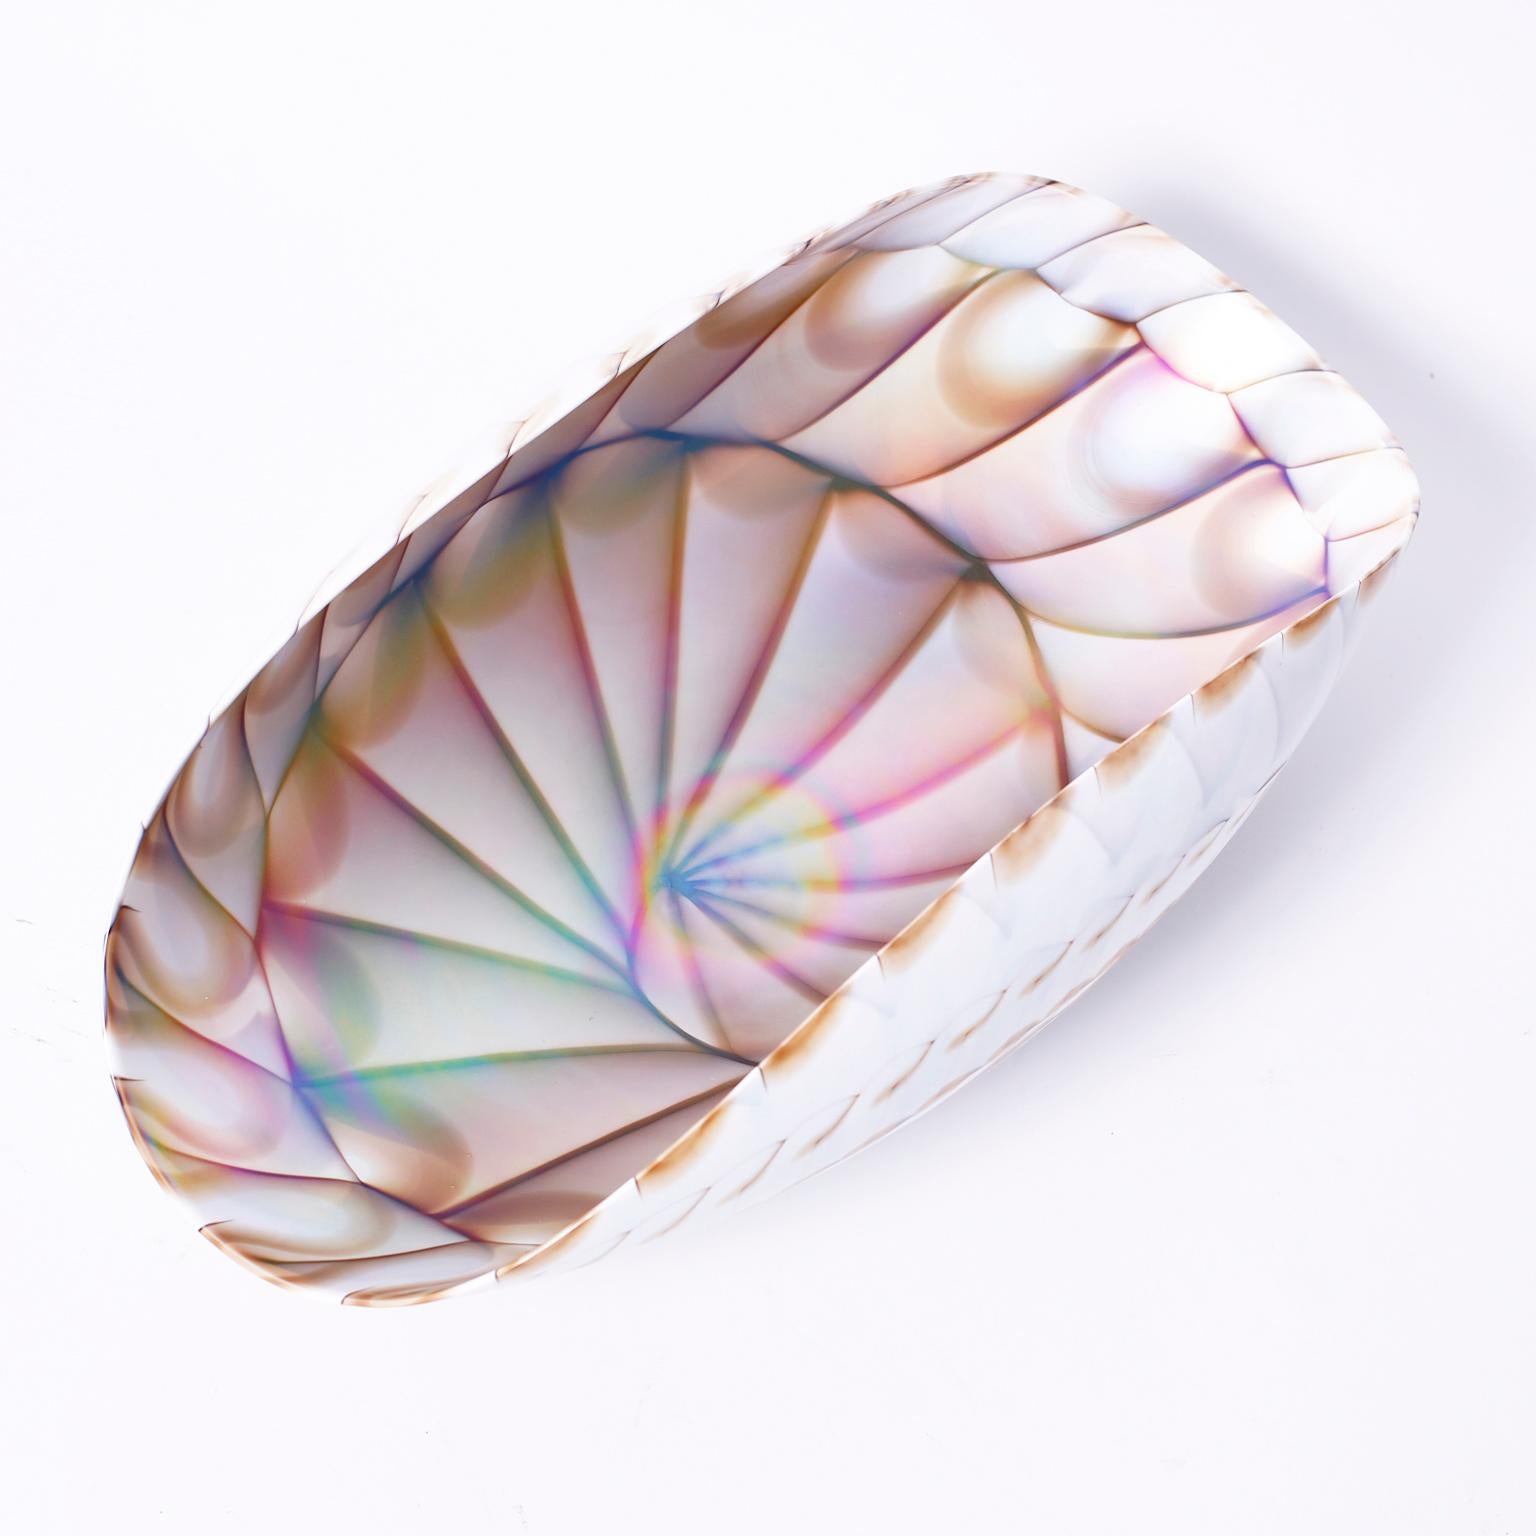 Sculpted hand blown glass bowl depicting a stylized sea shell with an iridescent example of the sacred geometry inside and sea inspired earth ties on the outside.